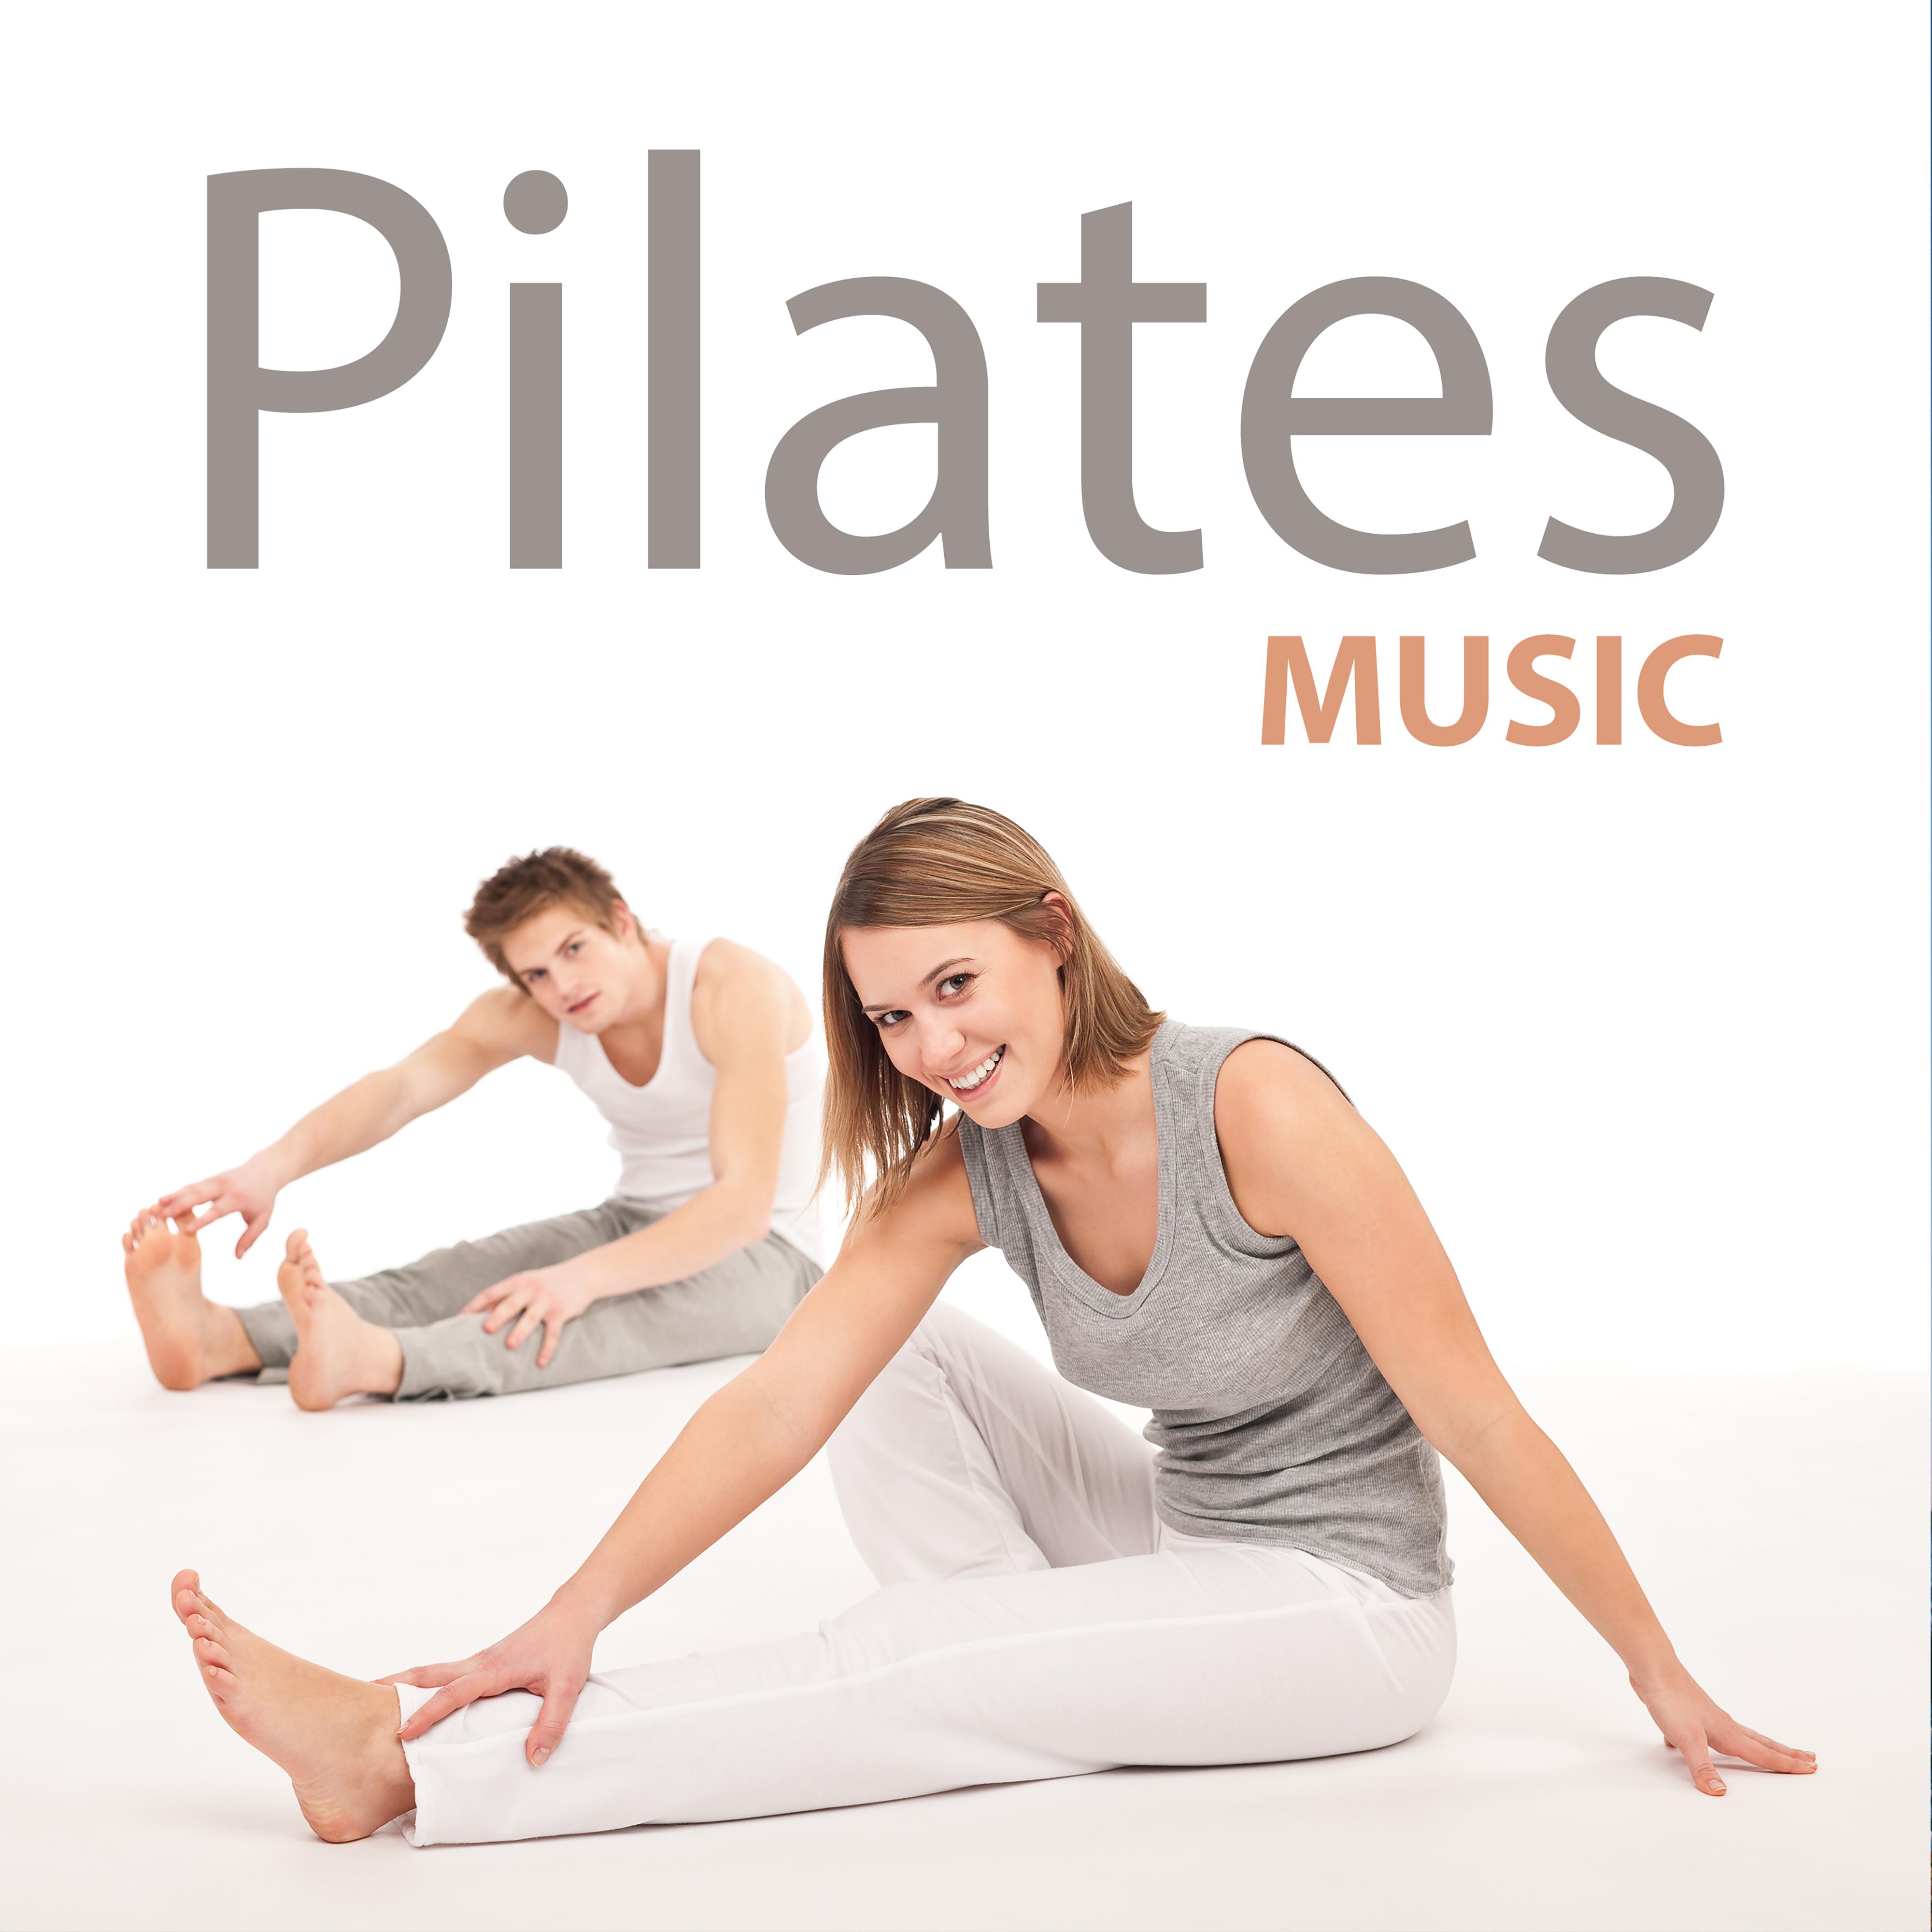 Pilates Music  - Essential Music, Chill Out 2017, Relaxation